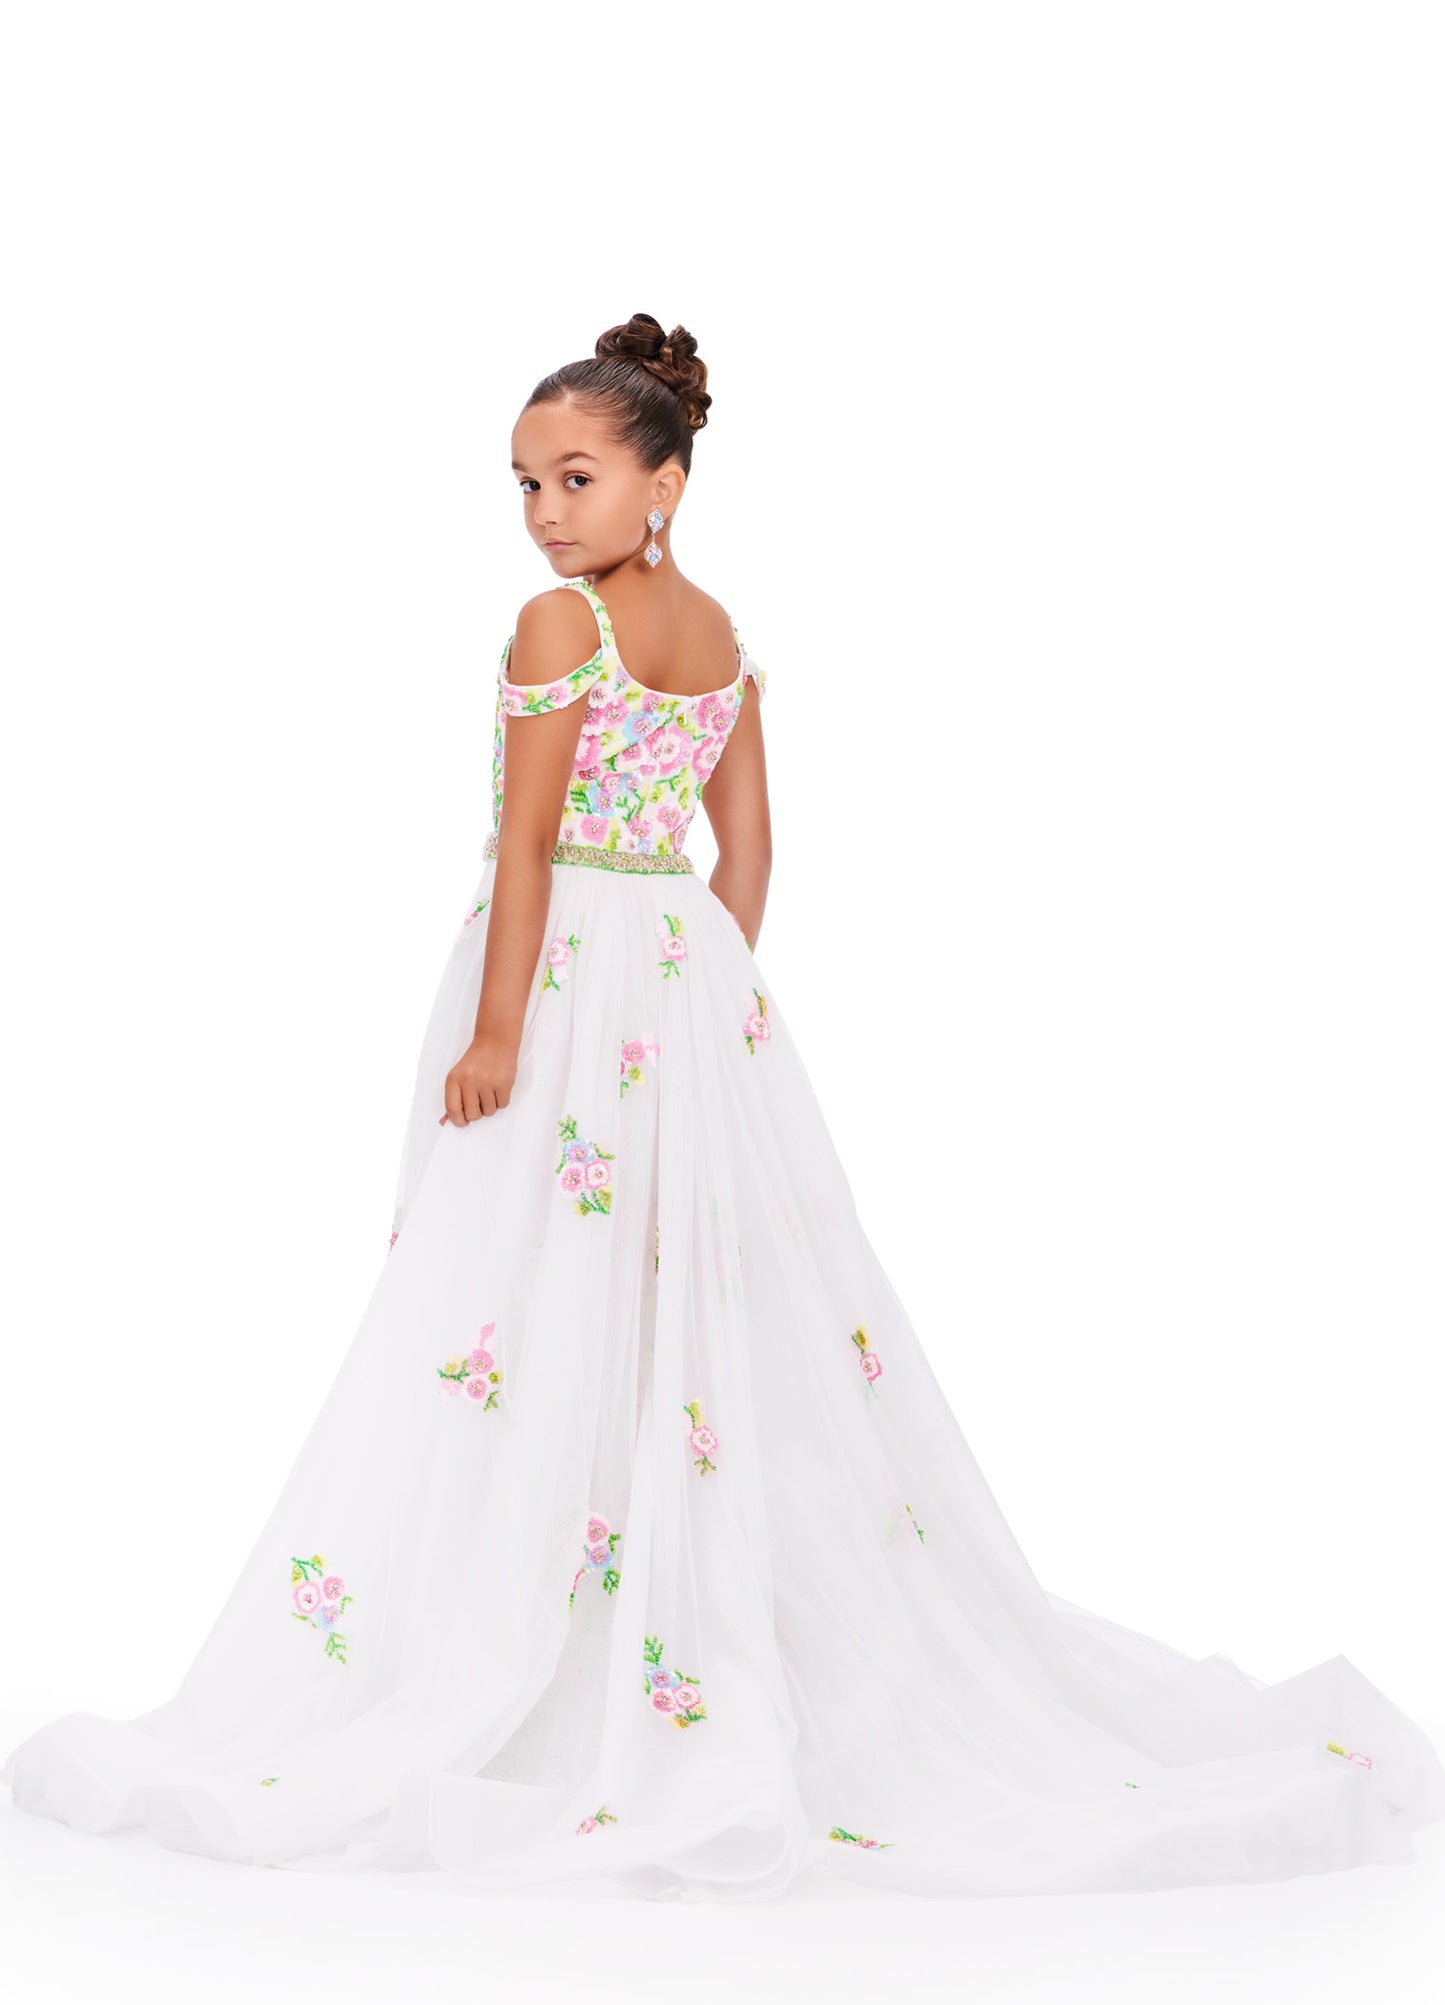 Expertly crafted for little girls who deserve to sparkle, the Ashley Lauren 8239 dress will make her shine on stage. The fitted silhouette flatters any figure while the beaded details and sequin overlay add a touch of glamour. Perfect for pageants and formal events. Bring the drama in this beaded column gown with shoulder draping straps. The removeable tulle overskirt is embellished with scattered beaded accents.